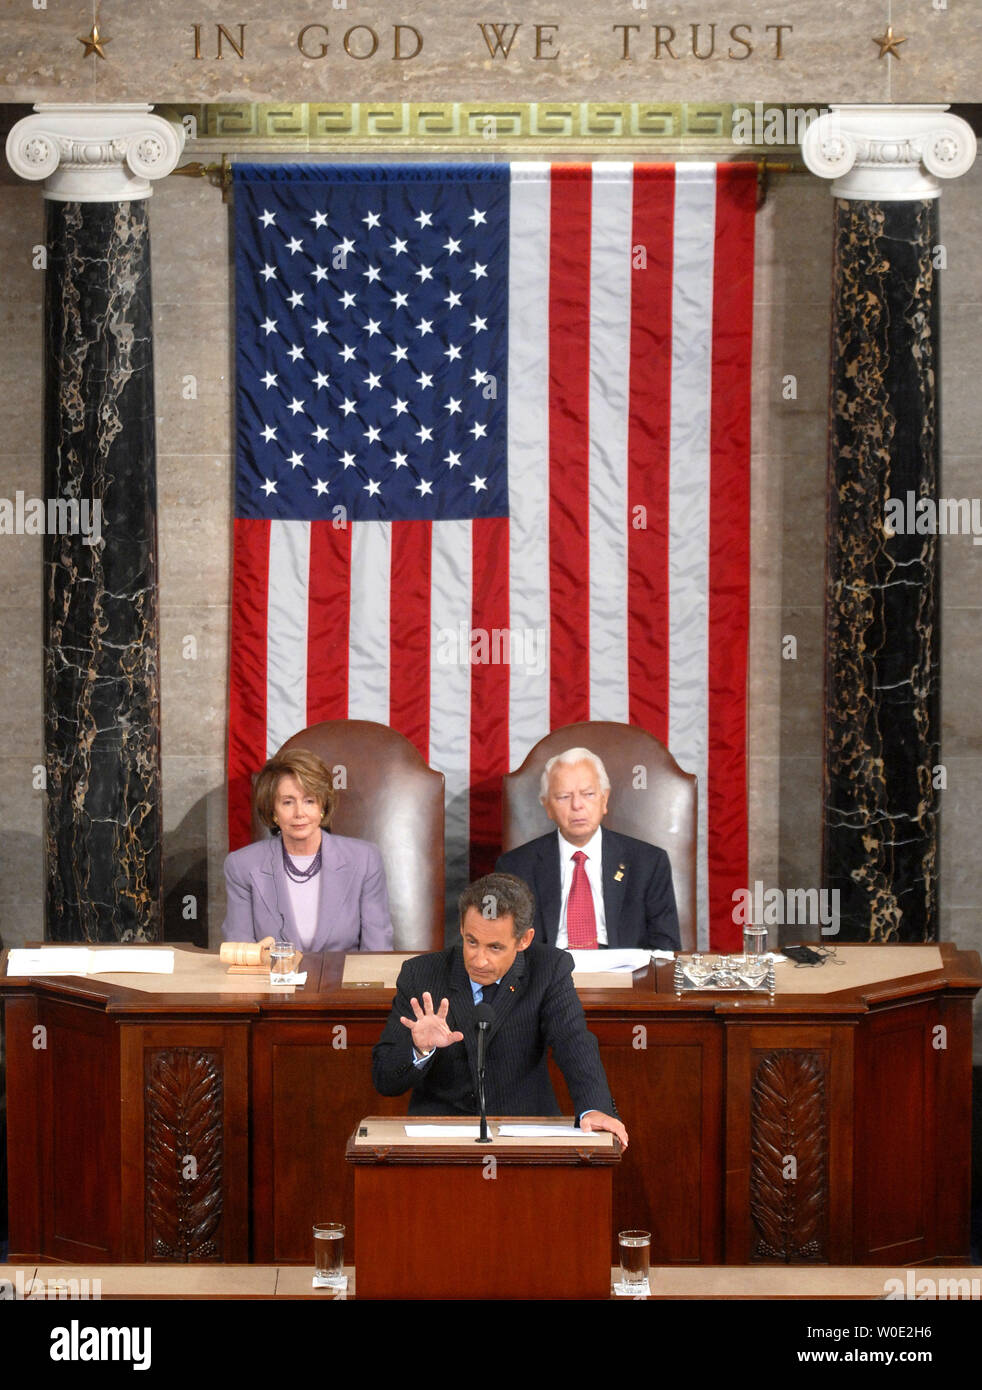 French President Nicolas Sarkozy addresses a joint meeting of Congress at the Capitol Building in Washington on November 7, 2007. House Majority Leader Nancy Pelosi and Senate President Pro Tempore Sen. Robert Byrd (D-WV) watched on. (UPI Photo/Kevin Dietsch) Stock Photo